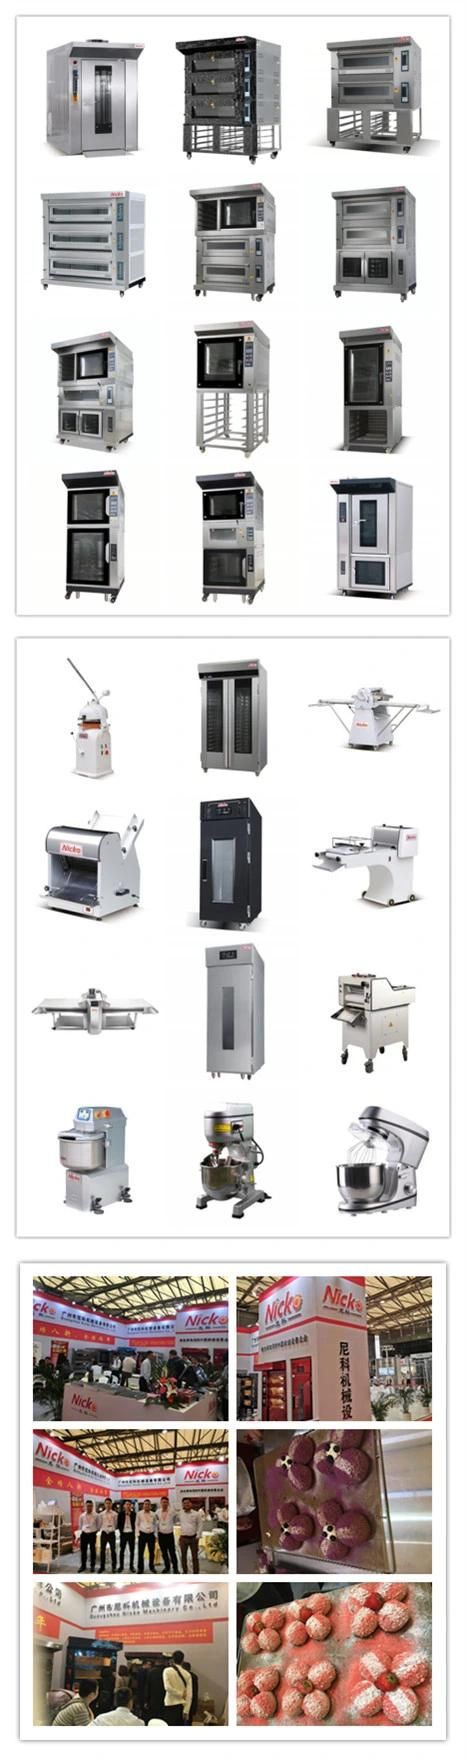 Nicko Electic/Diesel/Gas Commercial Rotary Oven for Baking Machine